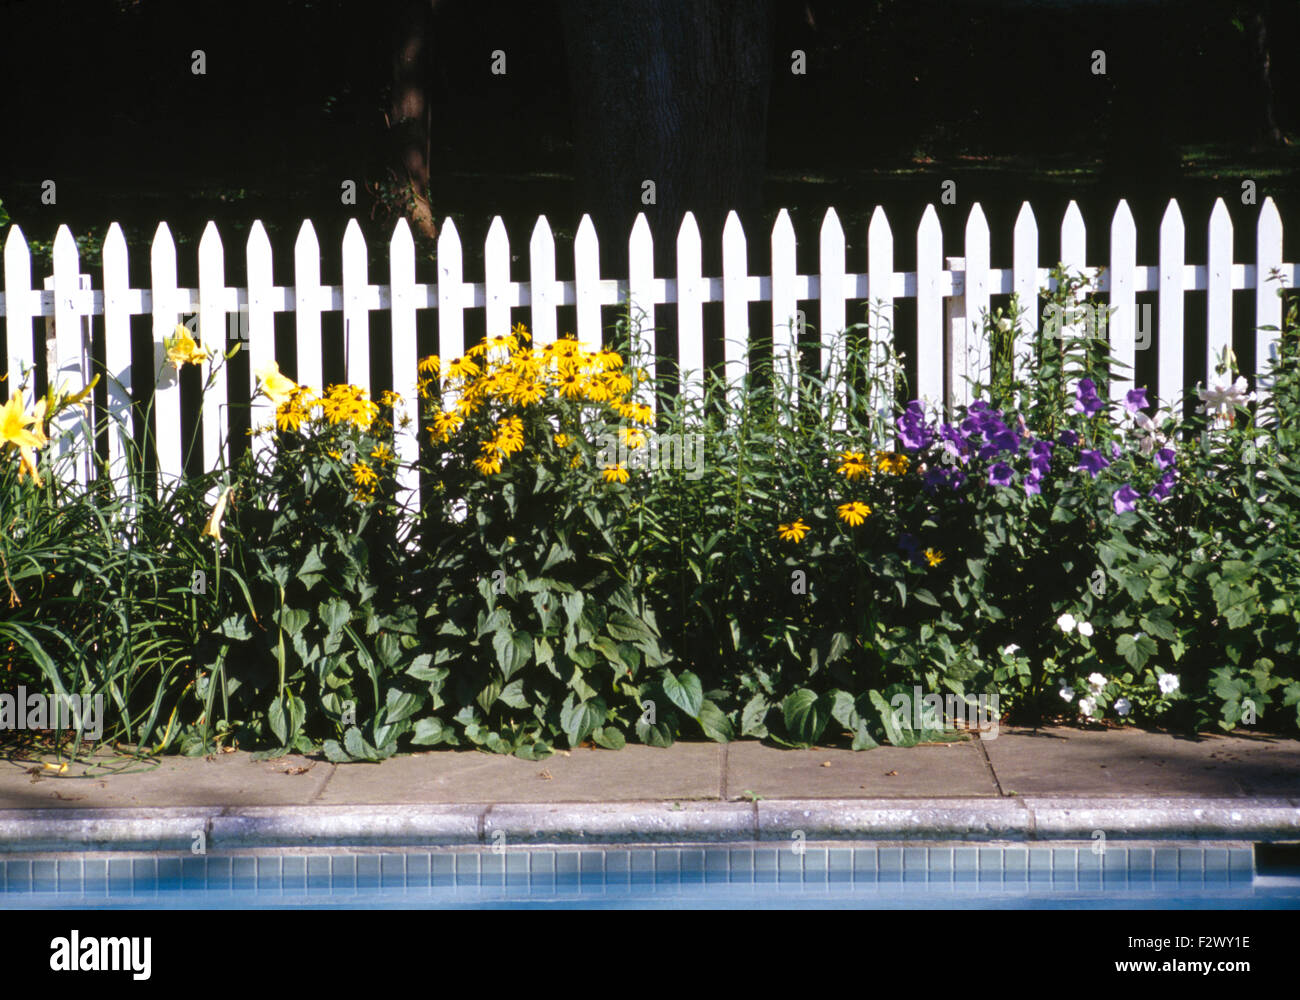 Yellow rudbeckia and blue campanula planted in front of a white picket fence Stock Photo